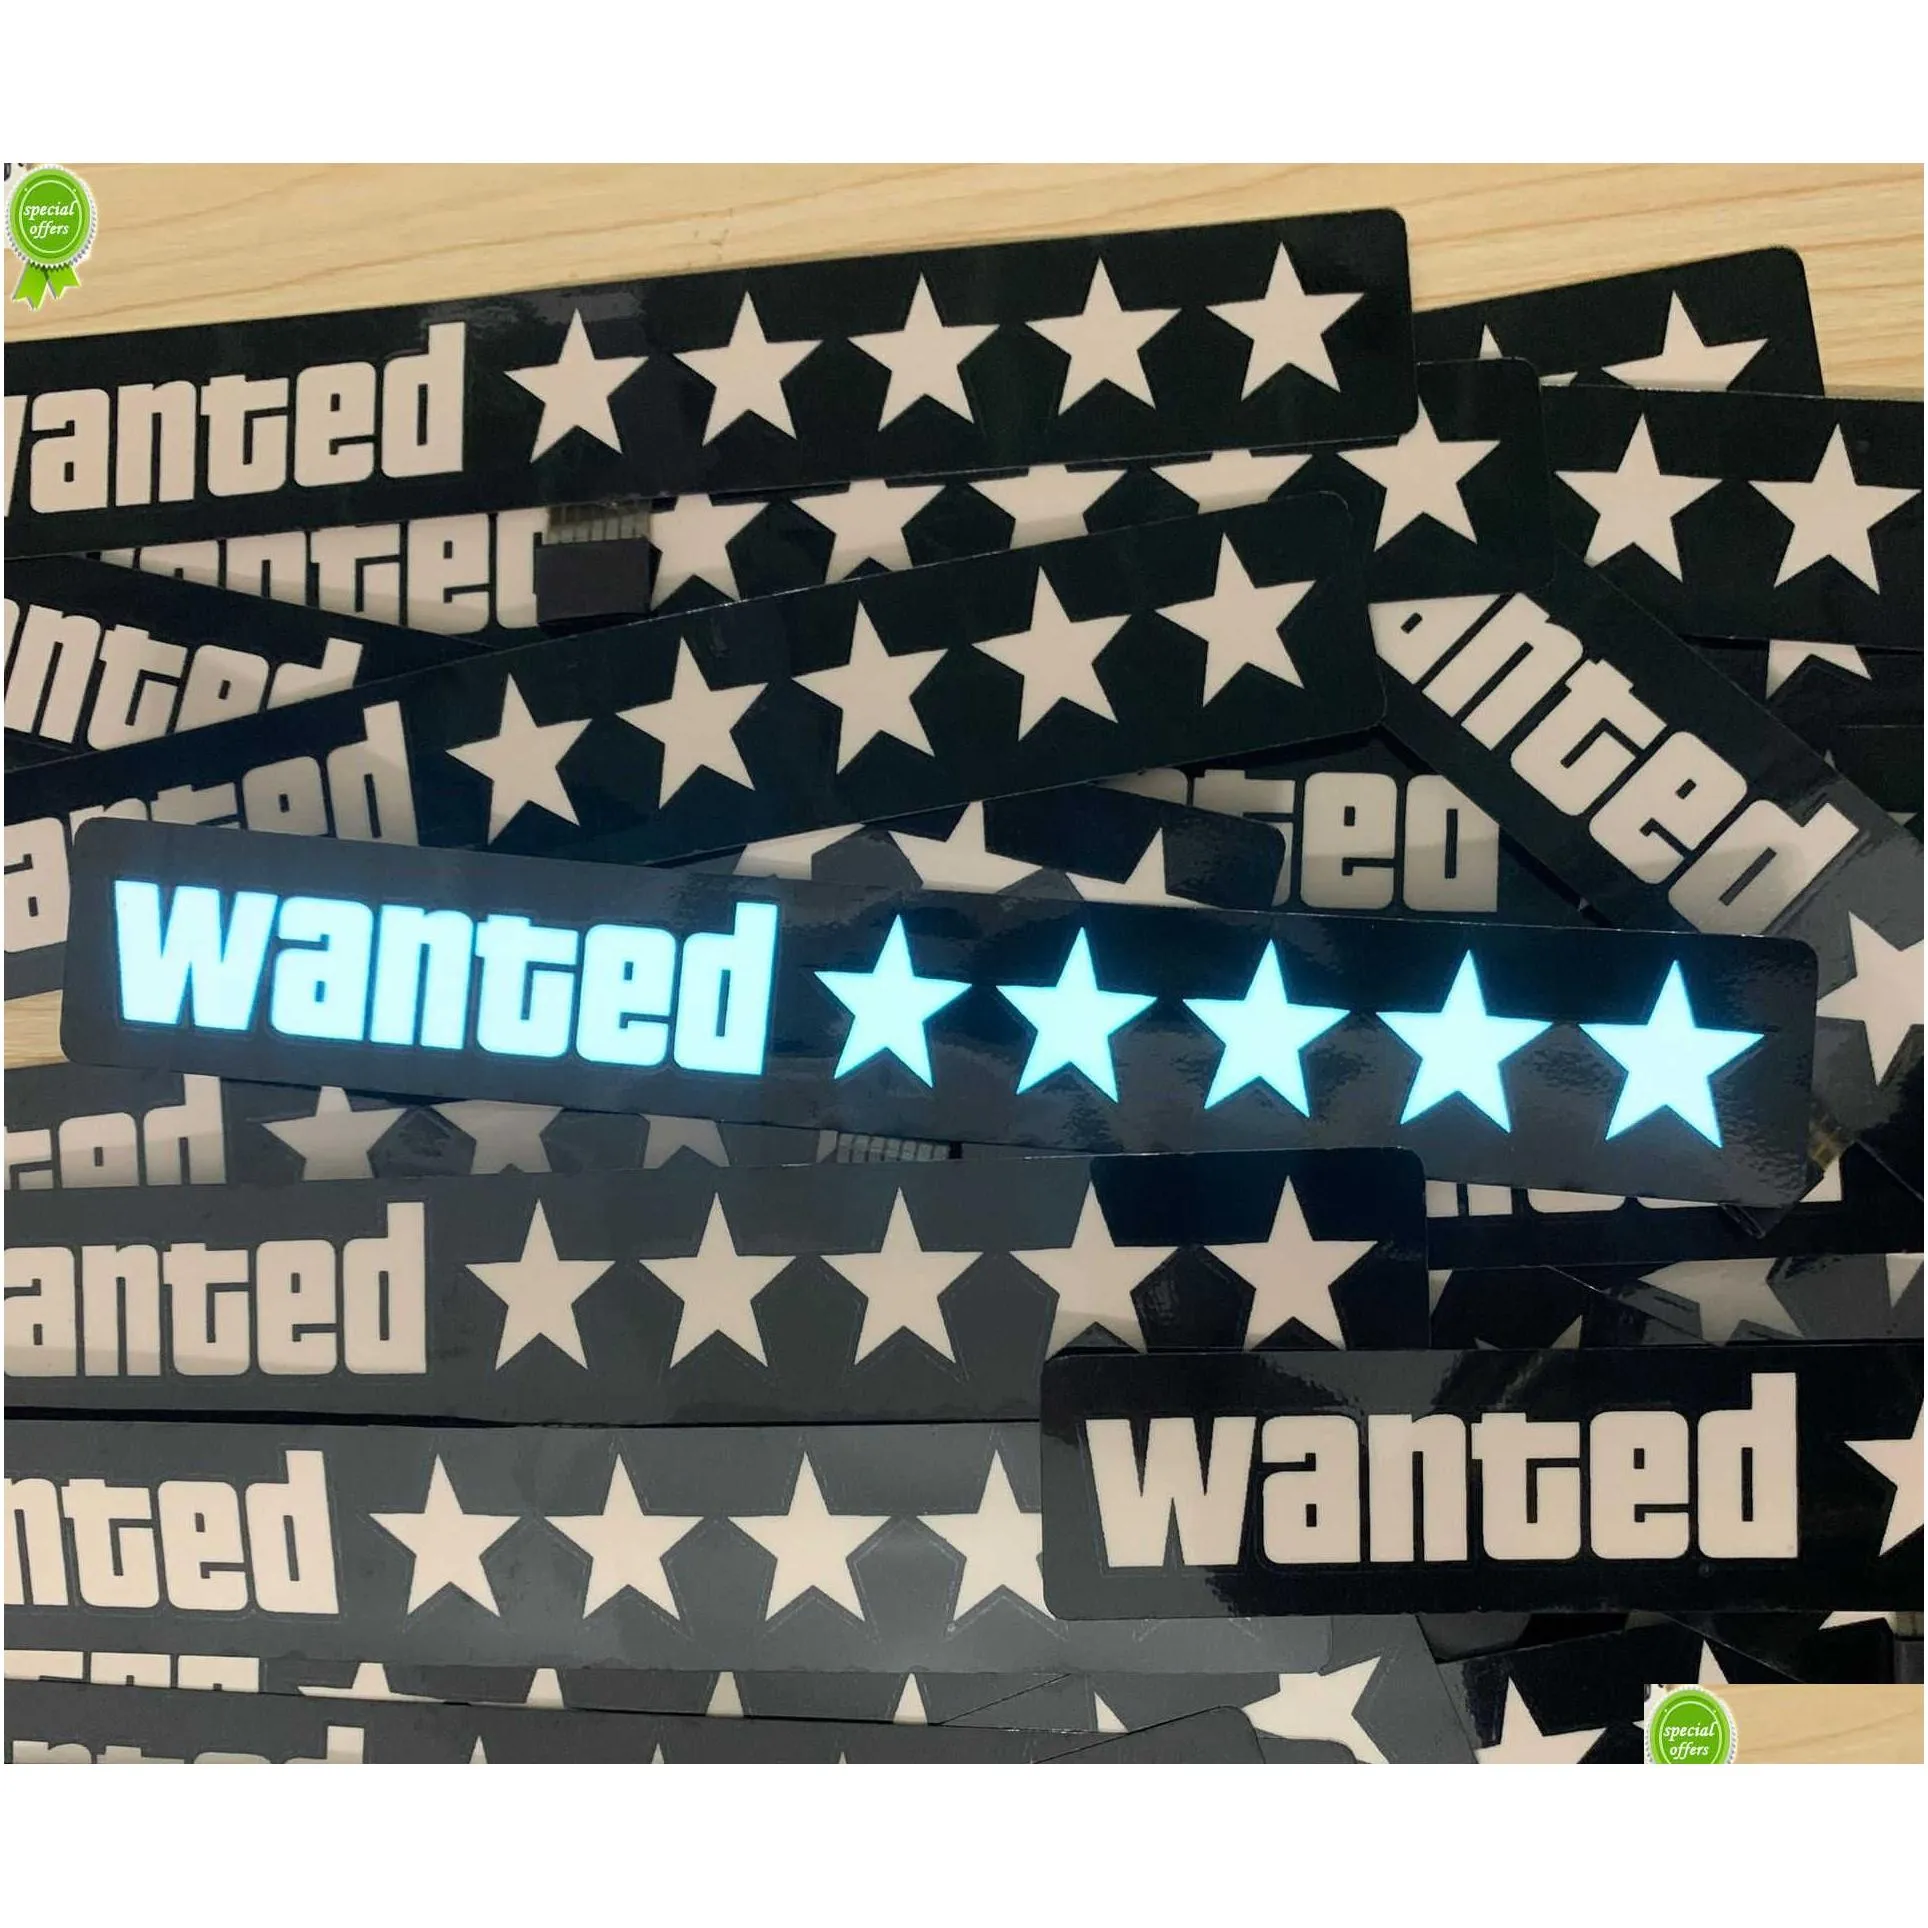  5 stars wanted led light-emitting window sticker windshield sticker decorative car accessories light board without battery